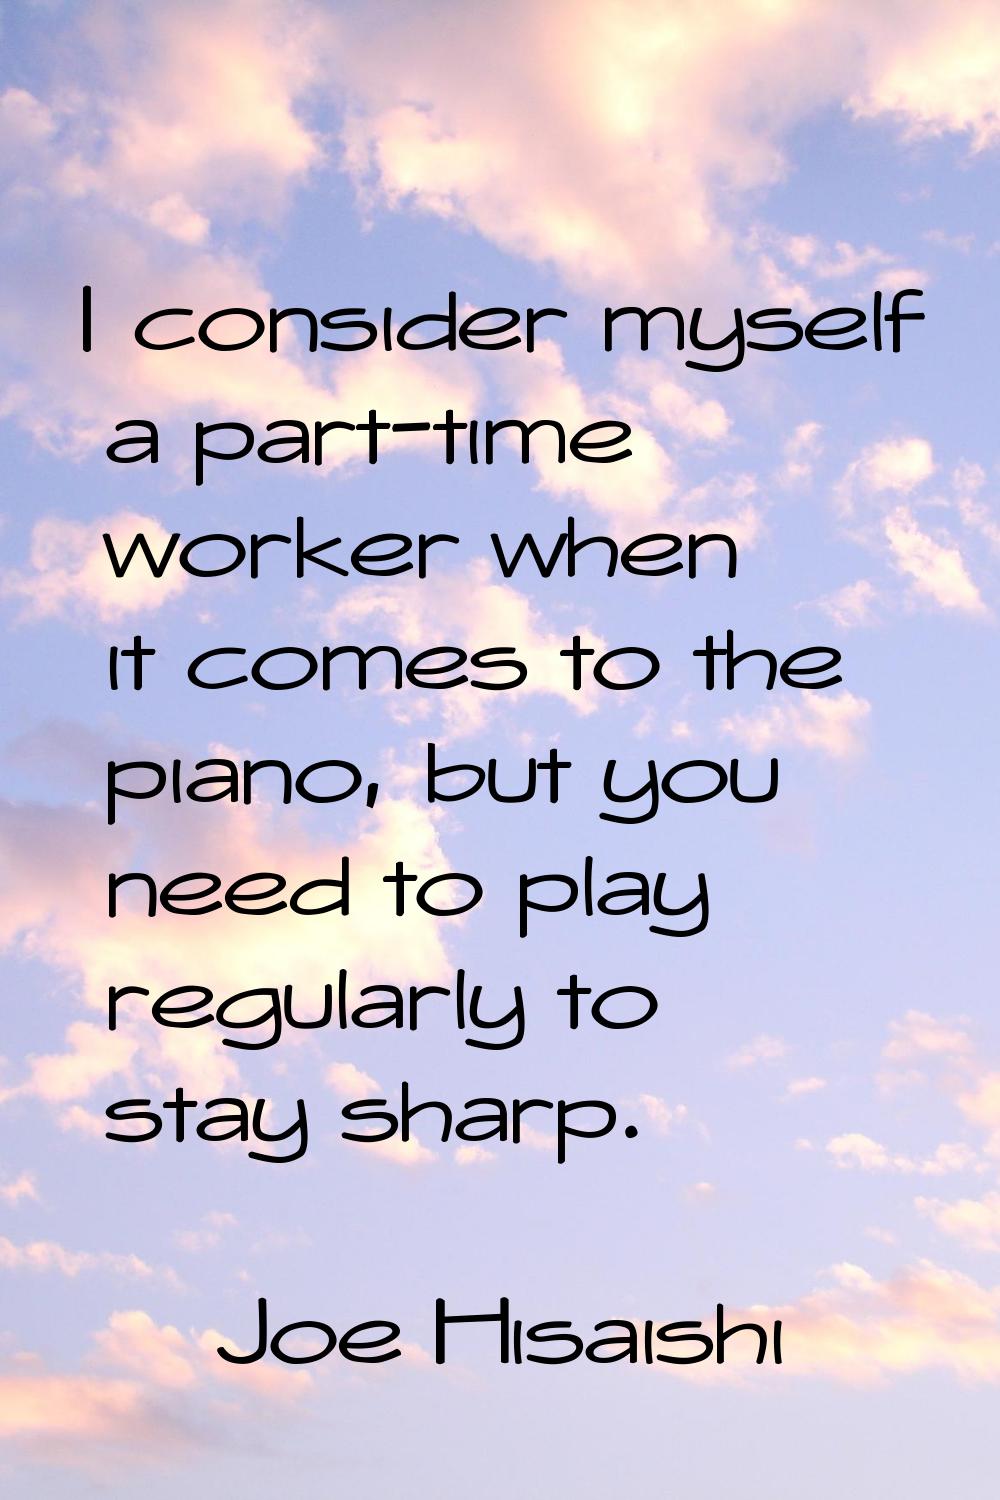 I consider myself a part-time worker when it comes to the piano, but you need to play regularly to 